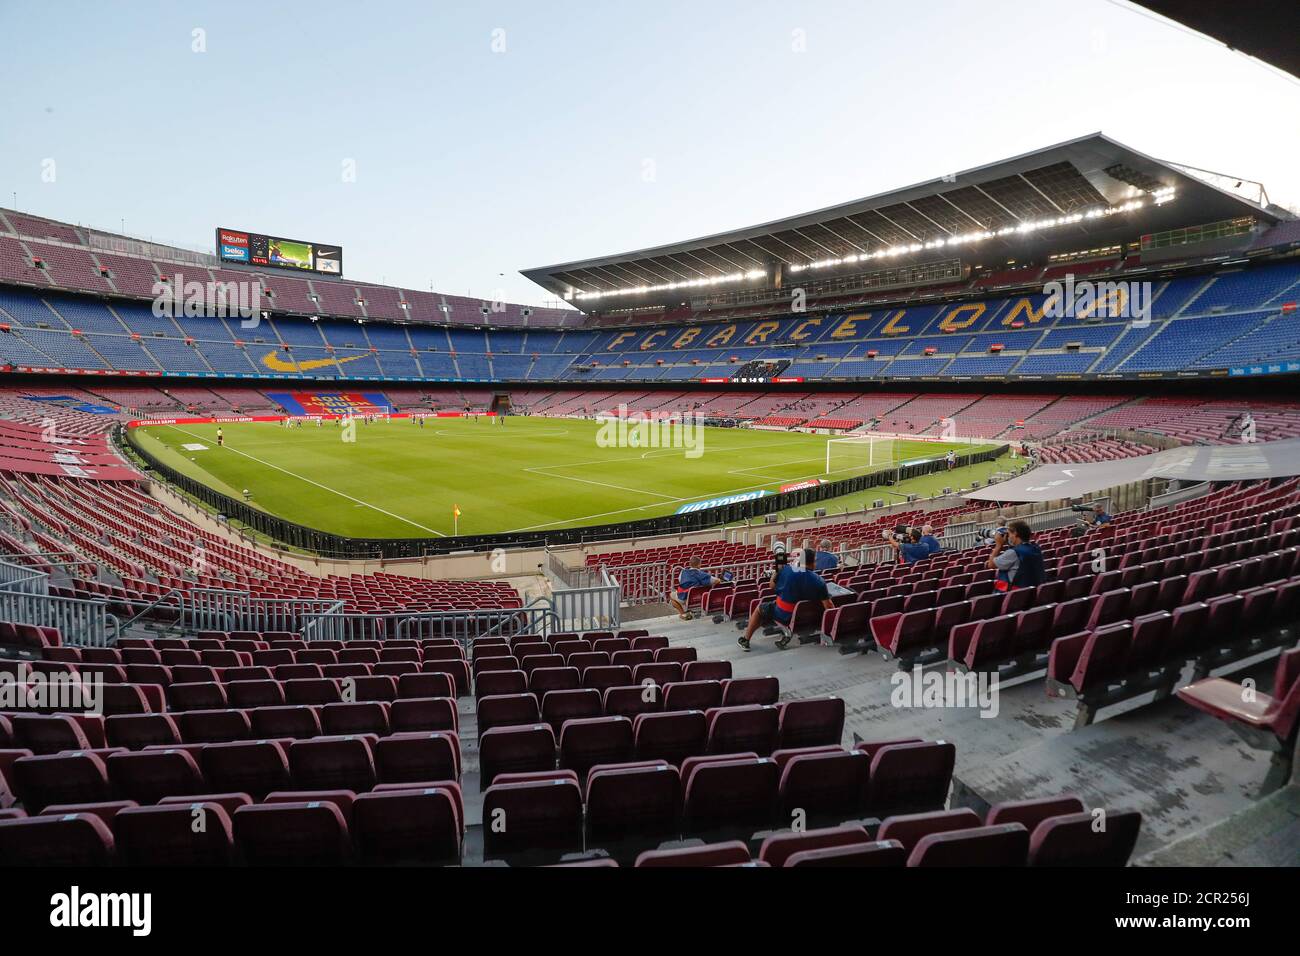 Barcelona, Barcelona, Spain. 19th Sep, 2020. Camp Nou before the Gamper Trophy match between FC Barcelona and Elche at Camp Nou on September 19, 2020 in Barcelona, Spain. Credit: David Ramirez/DAX/ZUMA Wire/Alamy Live News Stock Photo